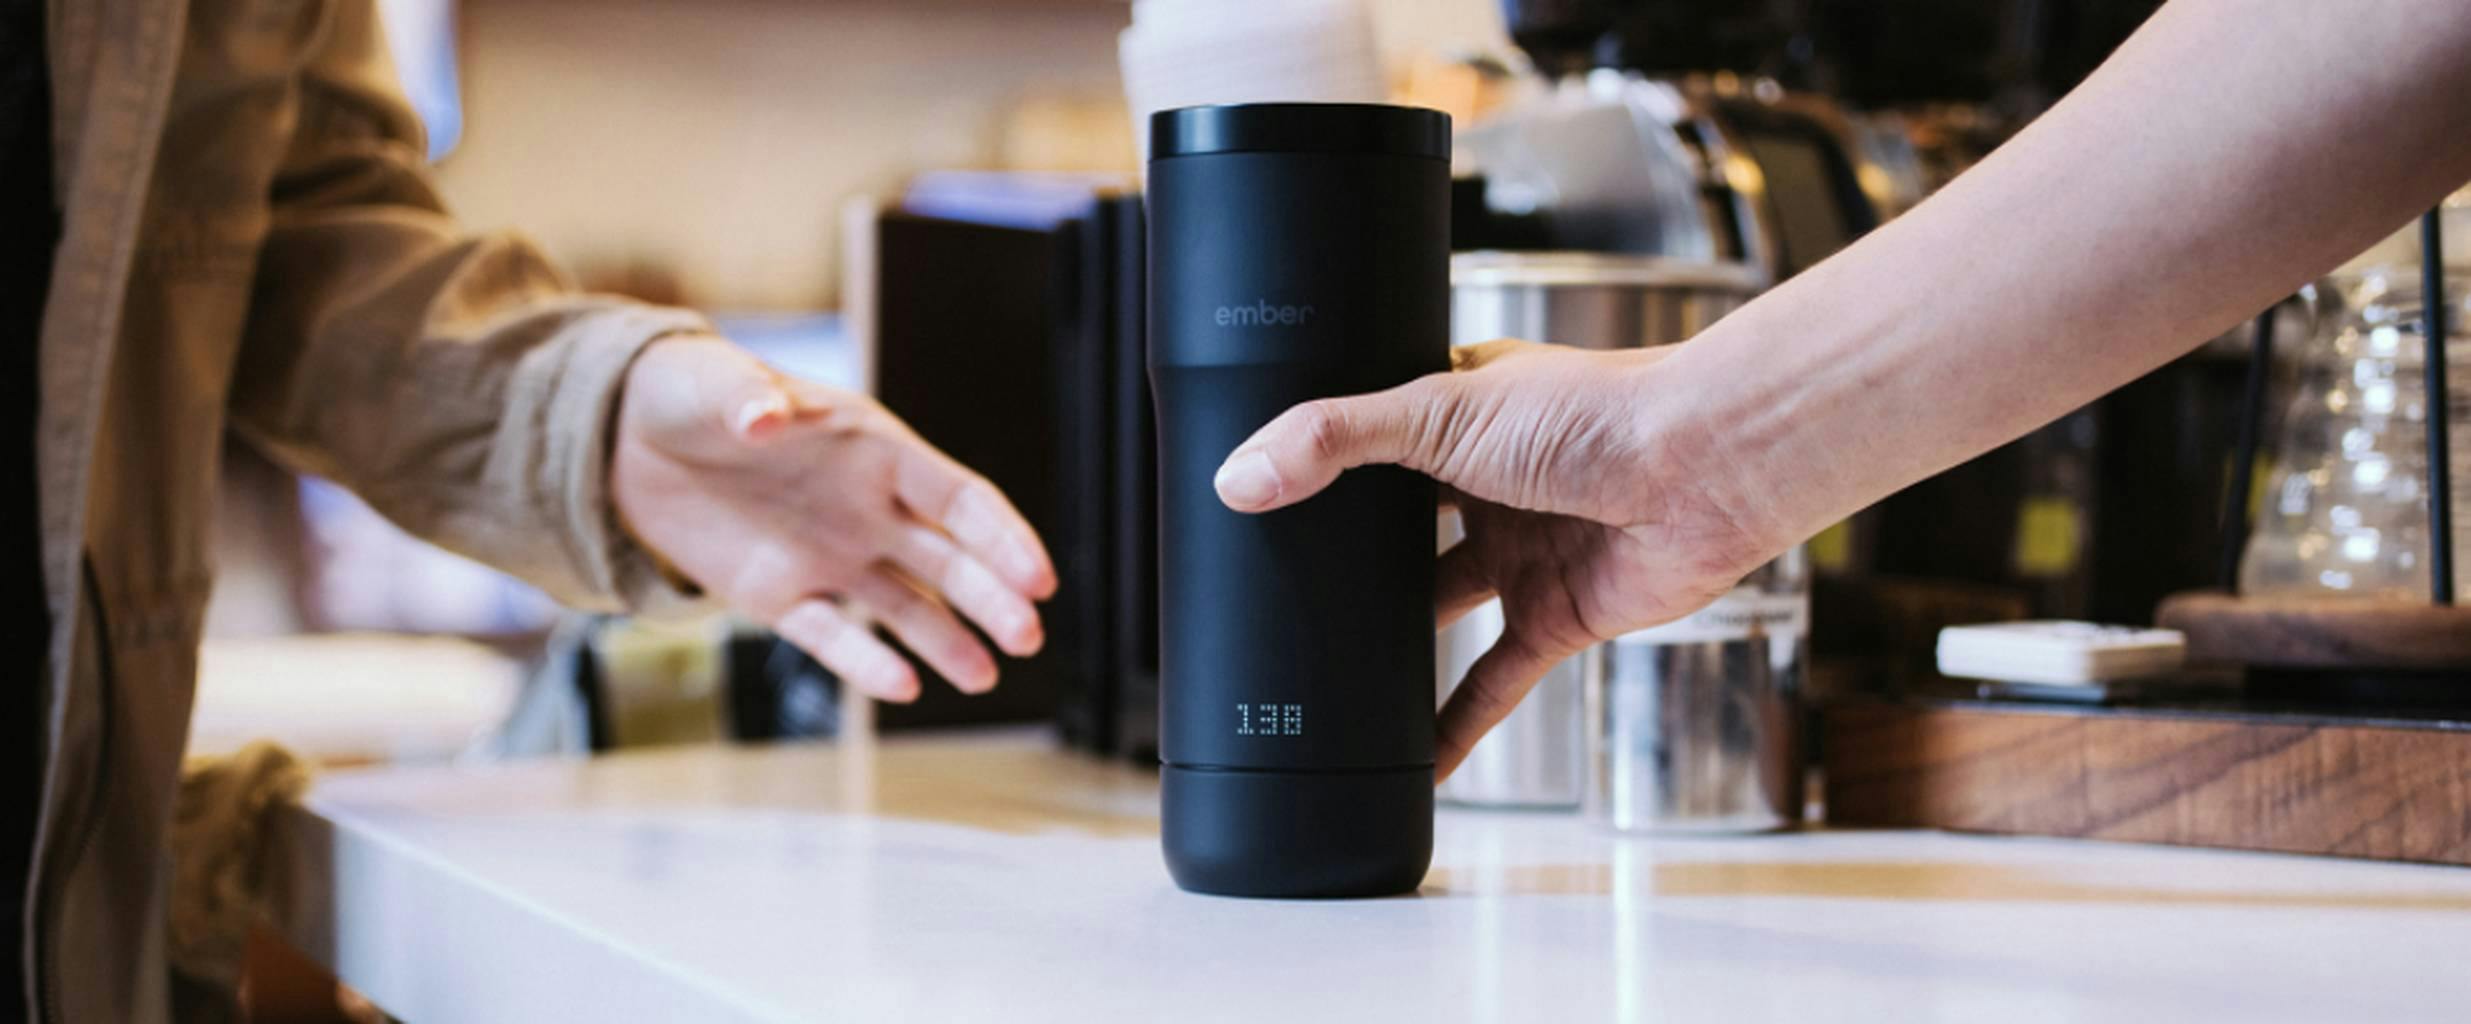 Review: Ember Mug Is the Heated Travel Mug You Didn't Know You Need